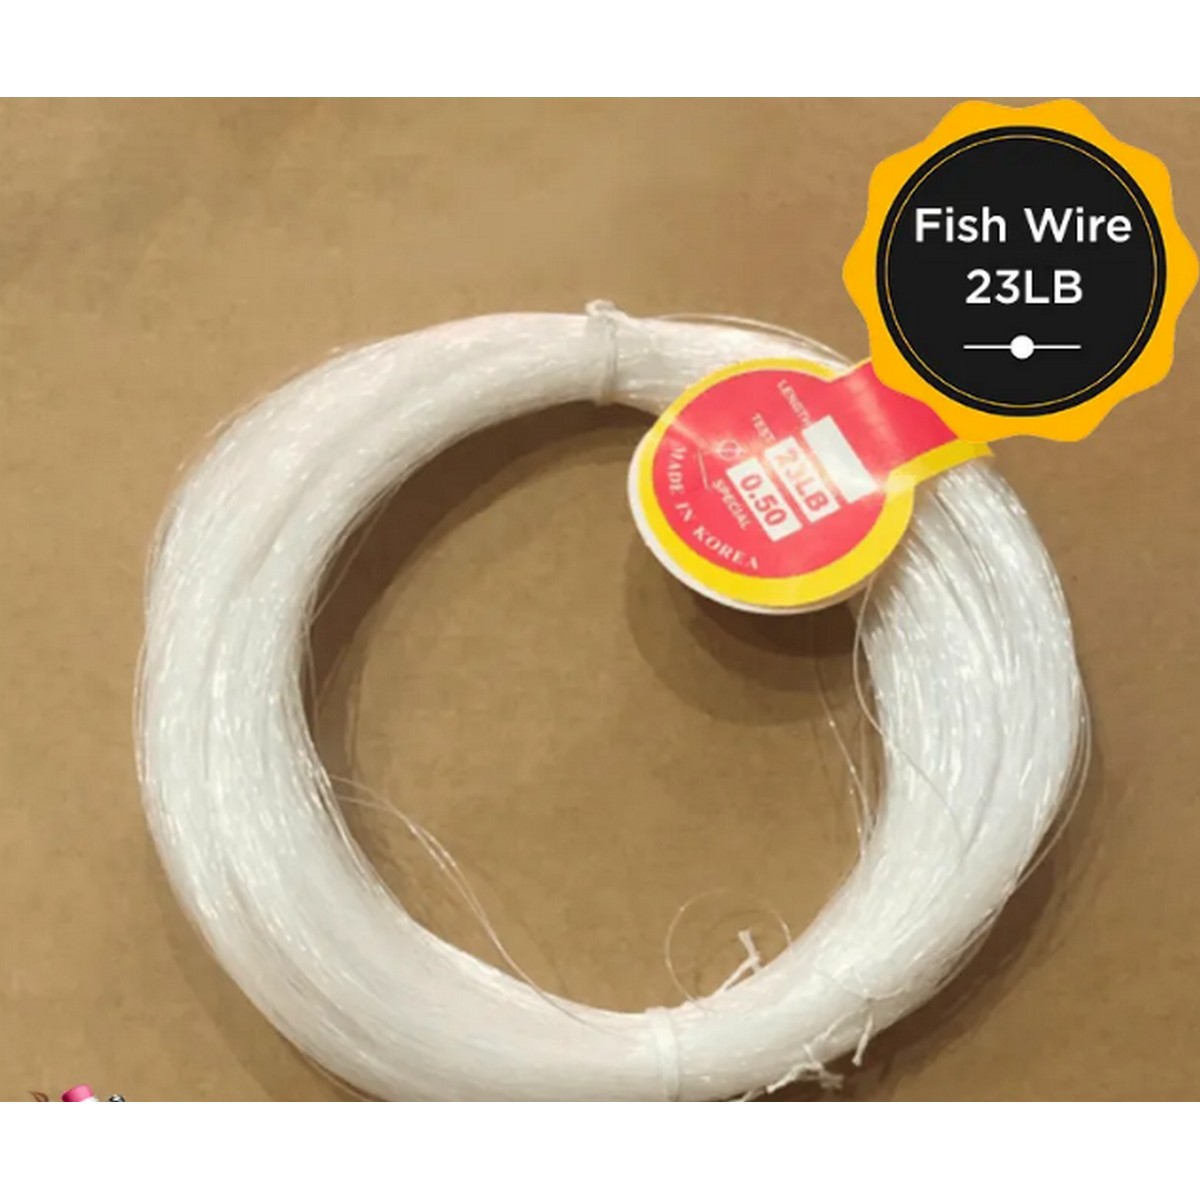 Fish Wire Used For Decoration And Craft Purposes